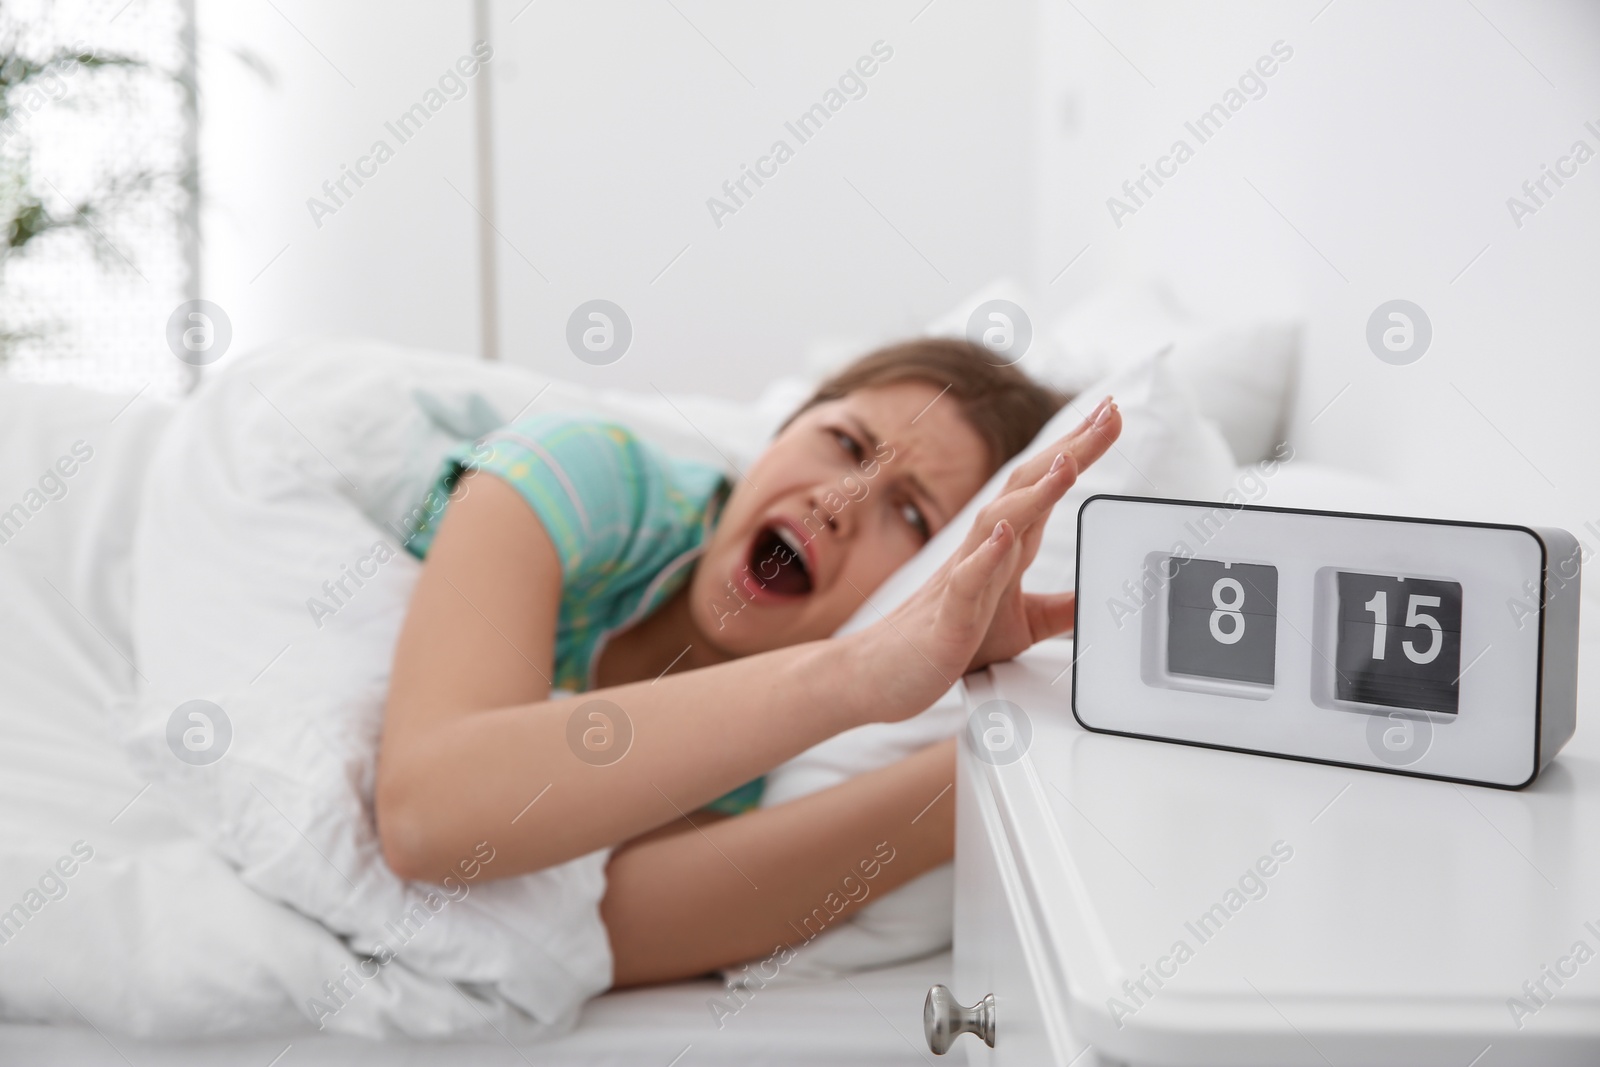 Photo of Clock and sleepy young woman at home in morning, focus on hand